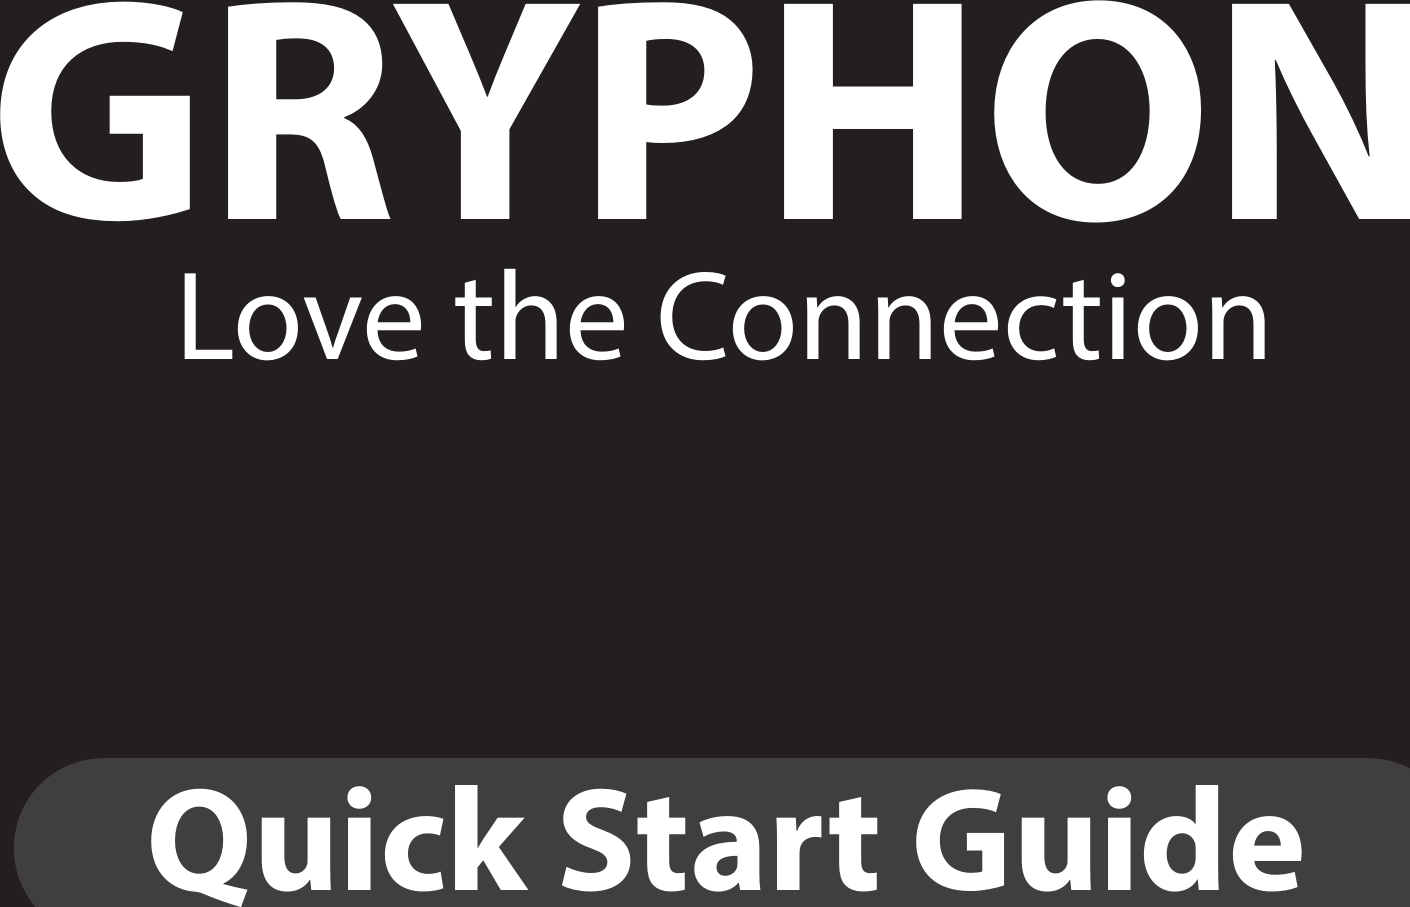 GRYPHONLove the ConnectionQuick Start Guide